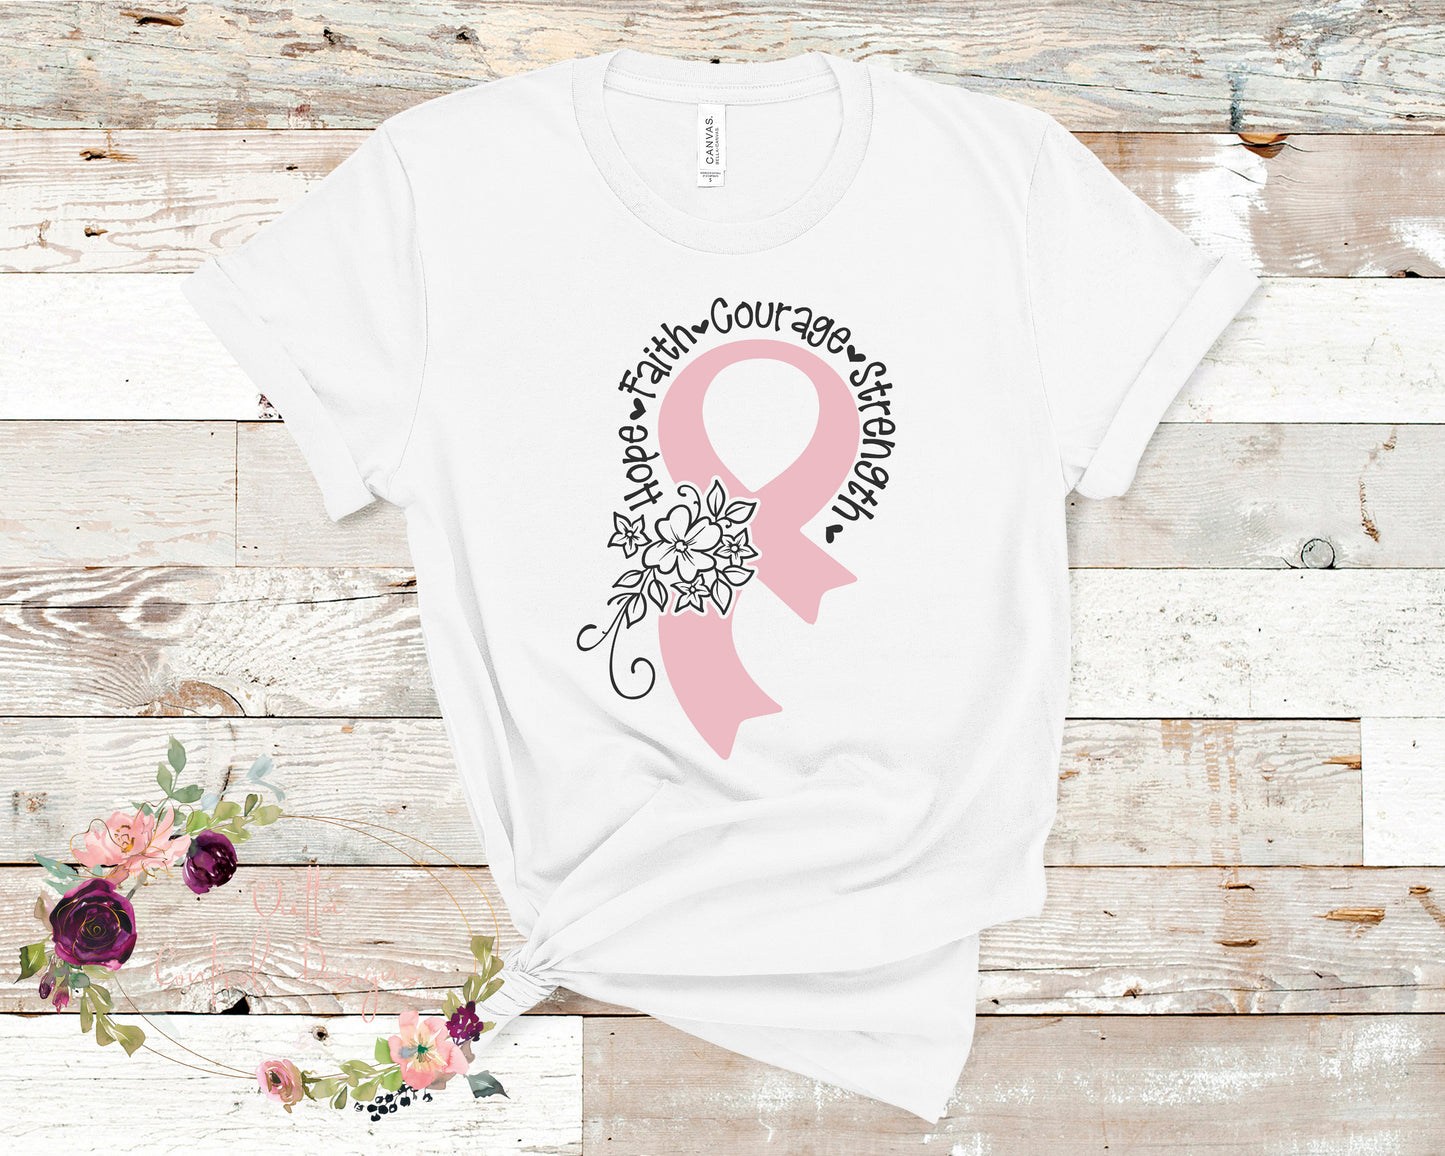 Courage, Hope Breast Cancer Awareness